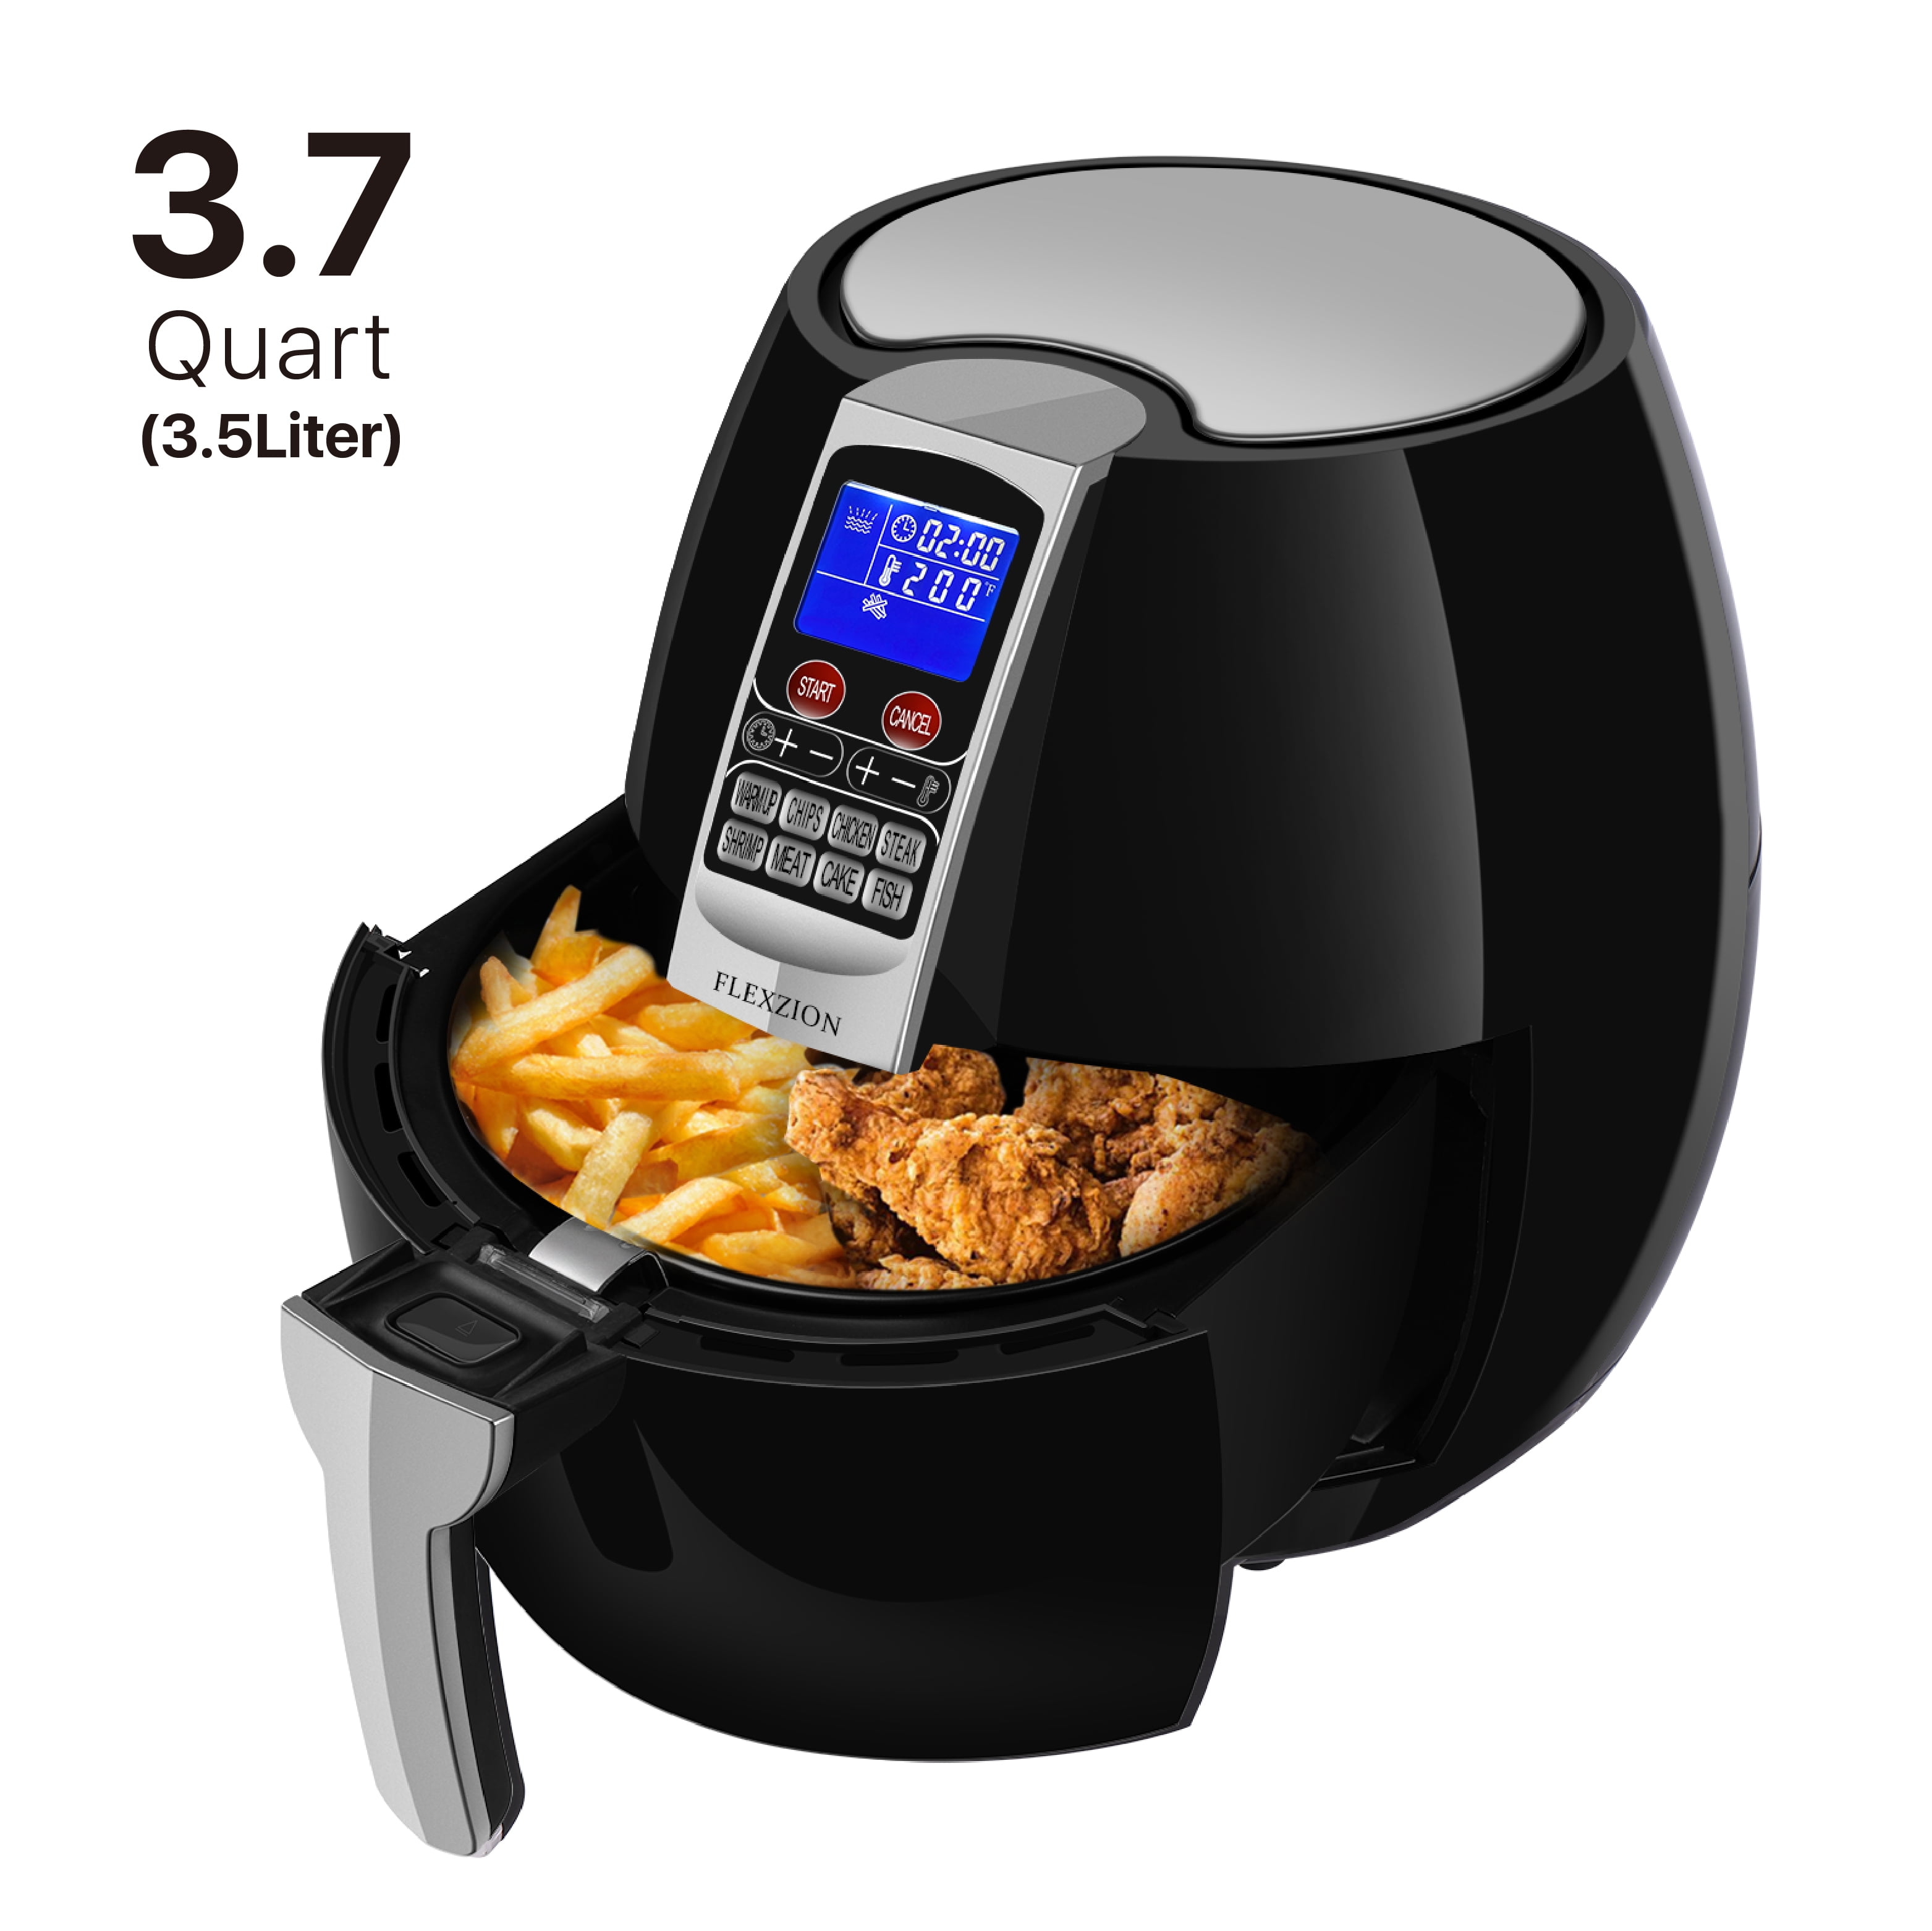 LIUXR Air Fryer, Air Fry, Oven Oilless Cooker, with Temperature Control &  Timer Knob, Nonstick Basket, Auto Shutoff, Healthy Cooking,Pink